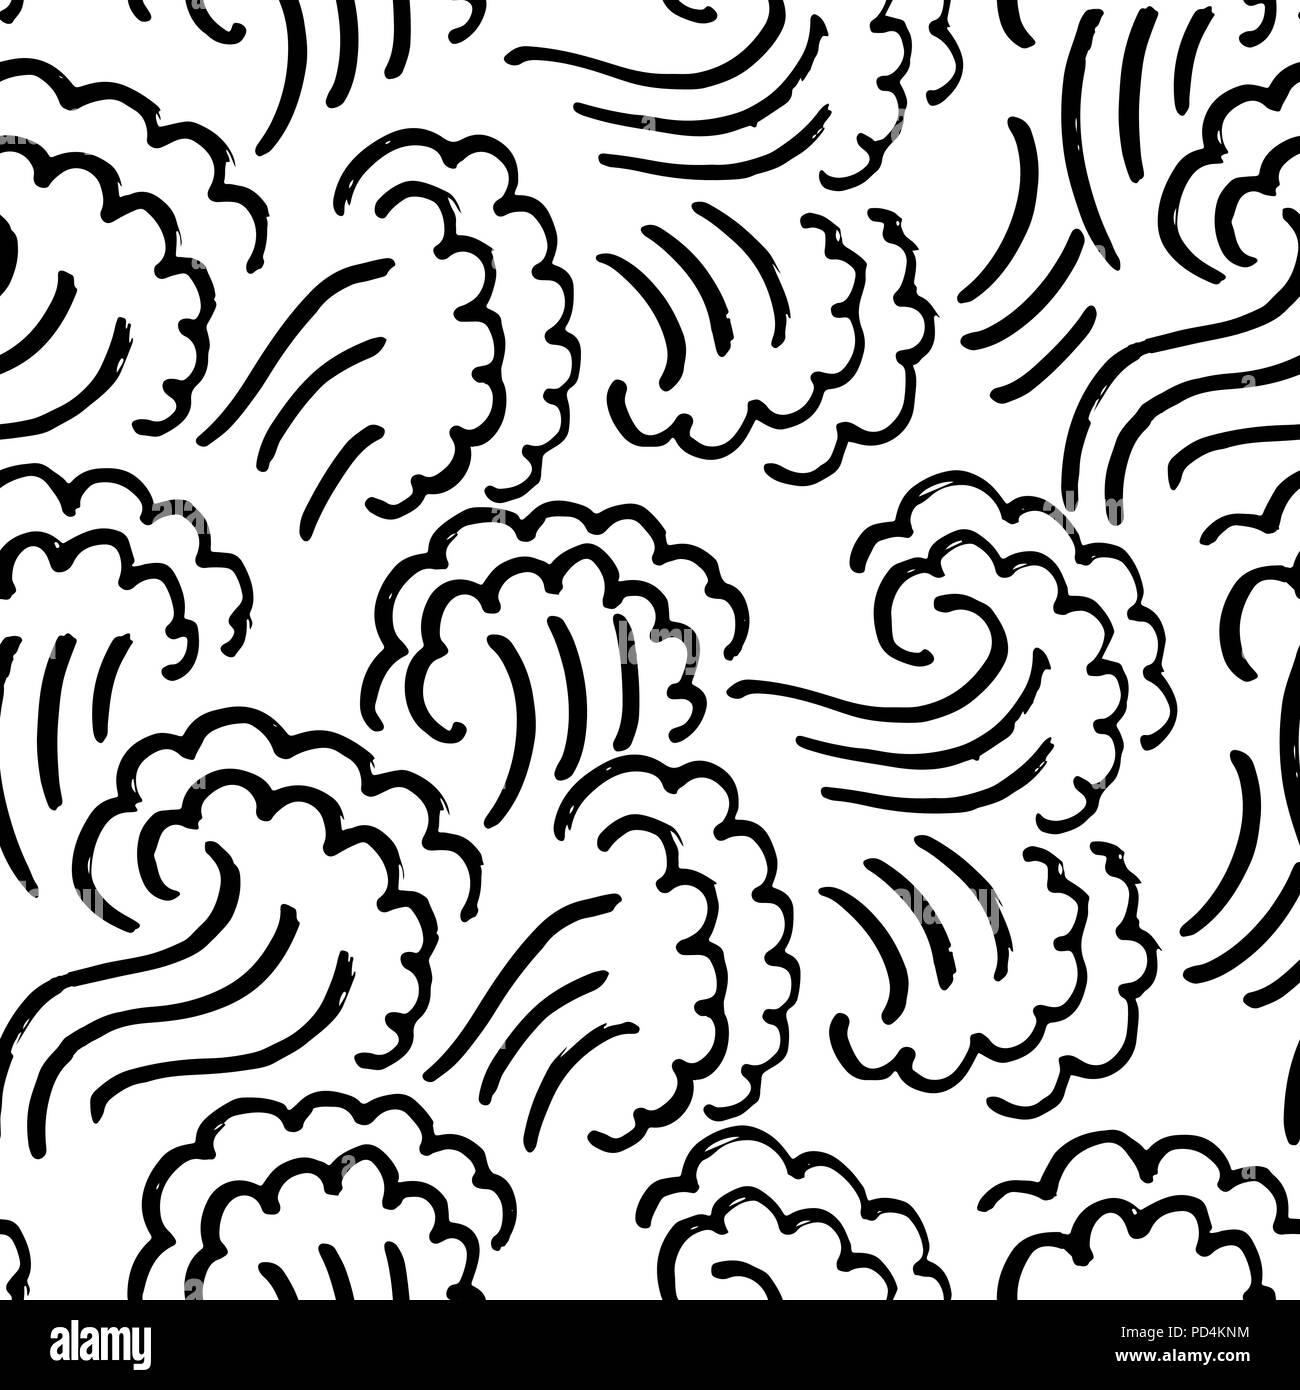 Abstract seamless wave pattern. Waving curling lines background. Vector illustration. Stock Vector